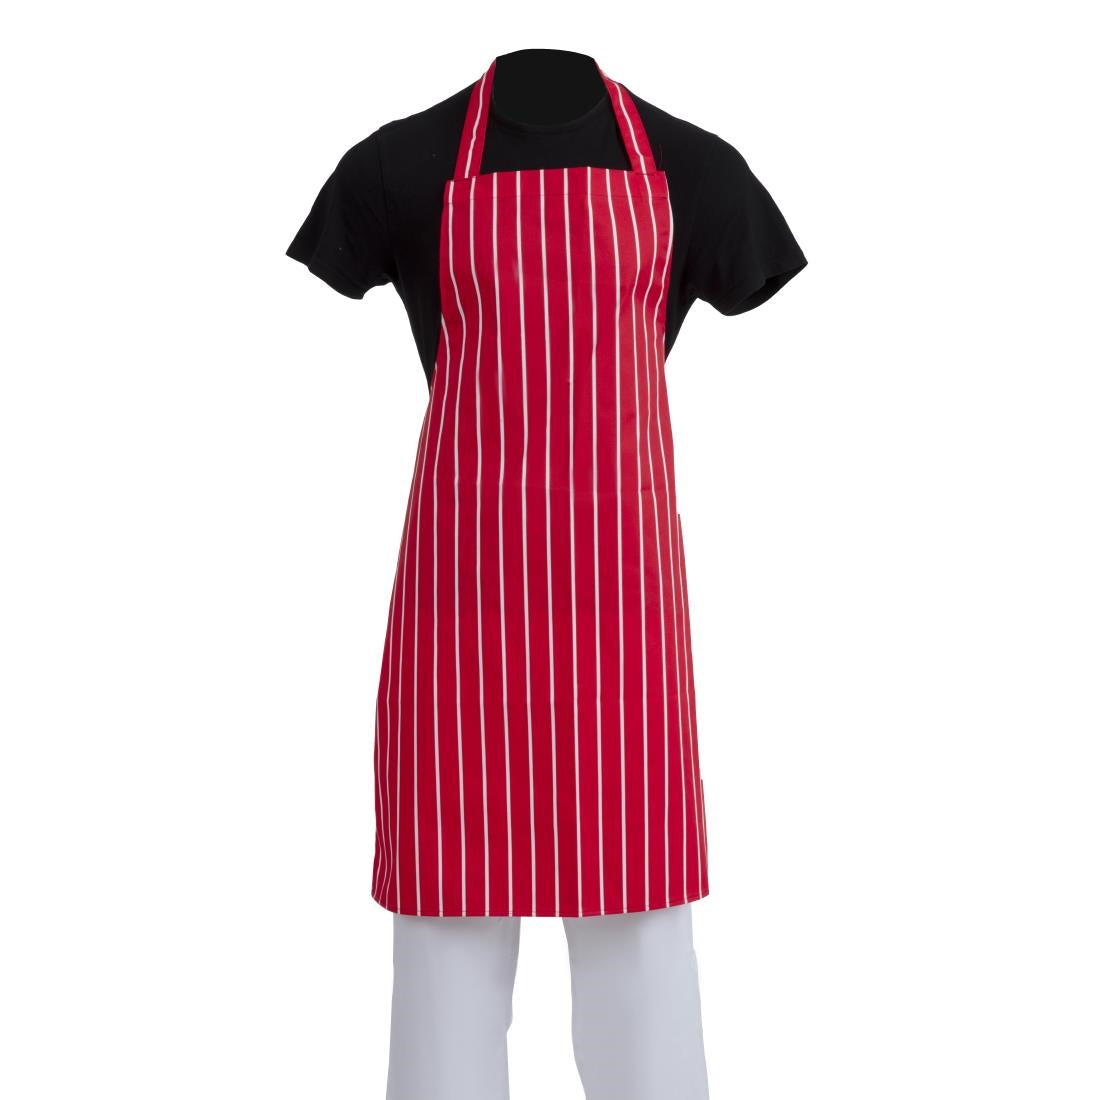 A532 Whites Bib Apron Red And White Stripe JD Catering Equipment Solutions Ltd